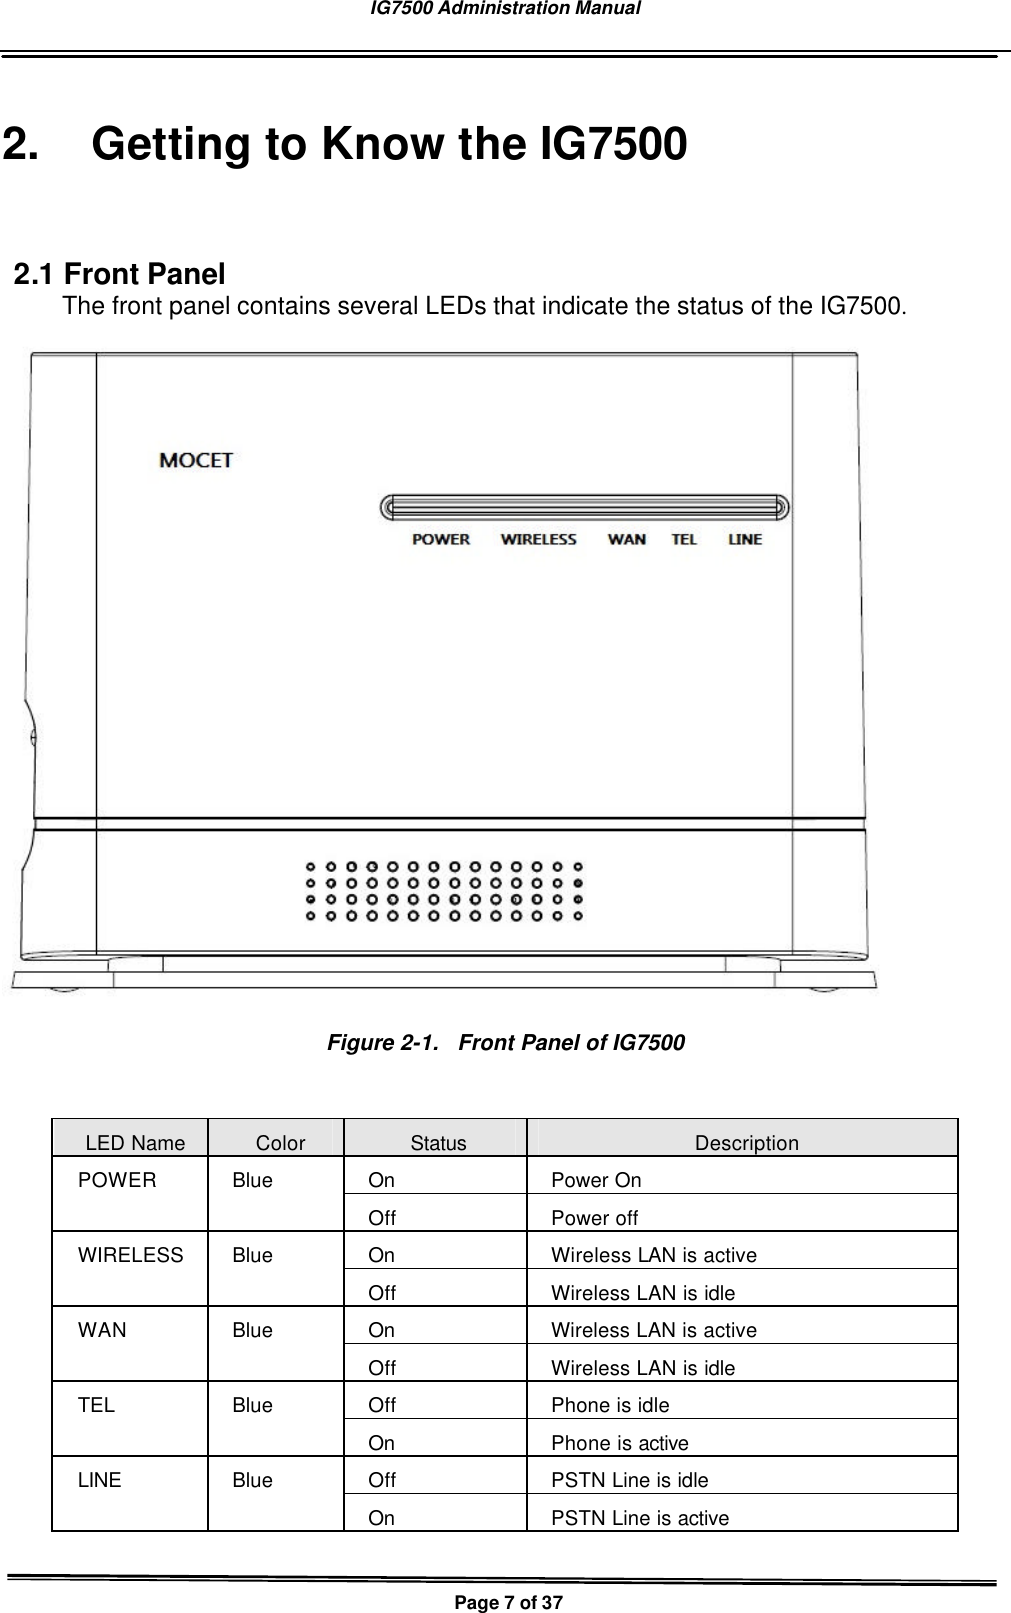 IG7500 Administration Manual   Page 7 of 37  2. Getting to Know the IG7500 2.1 Front Panel The front panel contains several LEDs that indicate the status of the IG7500.  Figure 2-1.  Front Panel of IG7500   LED Name Color Status Description On Power On POWER Blue Off Power off On Wireless LAN is active WIRELESS Blue Off Wireless LAN is idle On Wireless LAN is active WAN Blue Off Wireless LAN is idle Off Phone is idle TEL Blue On Phone is active Off PSTN Line is idle LINE Blue On PSTN Line is active 